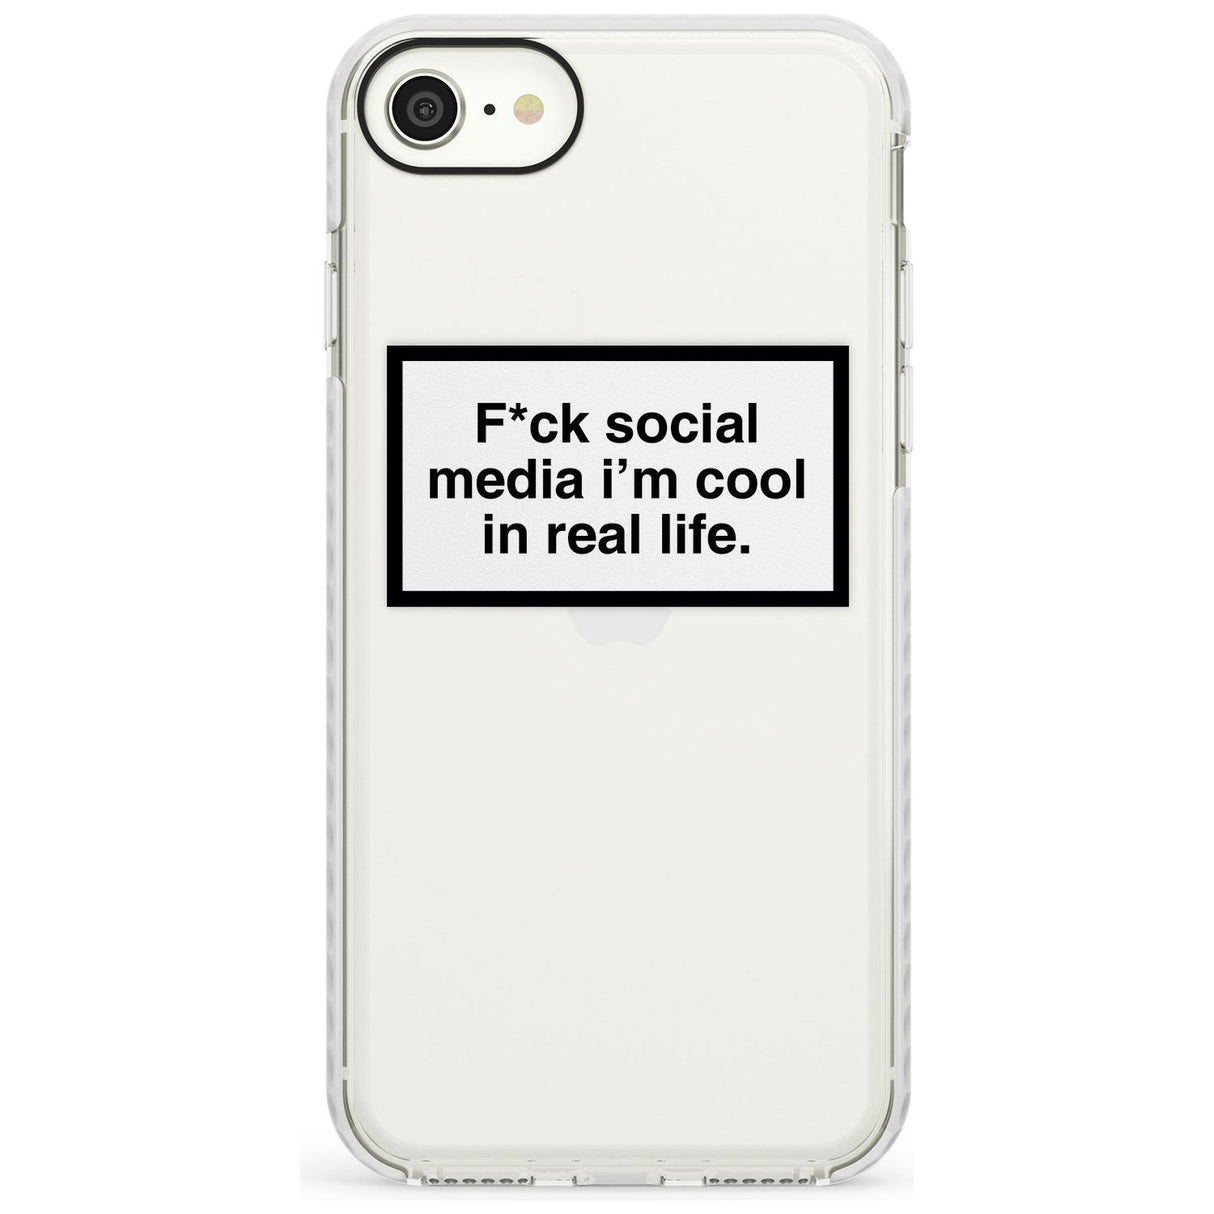 F*ck social media I'm cool in real life Slim TPU Phone Case for iPhone SE 8 7 Plus